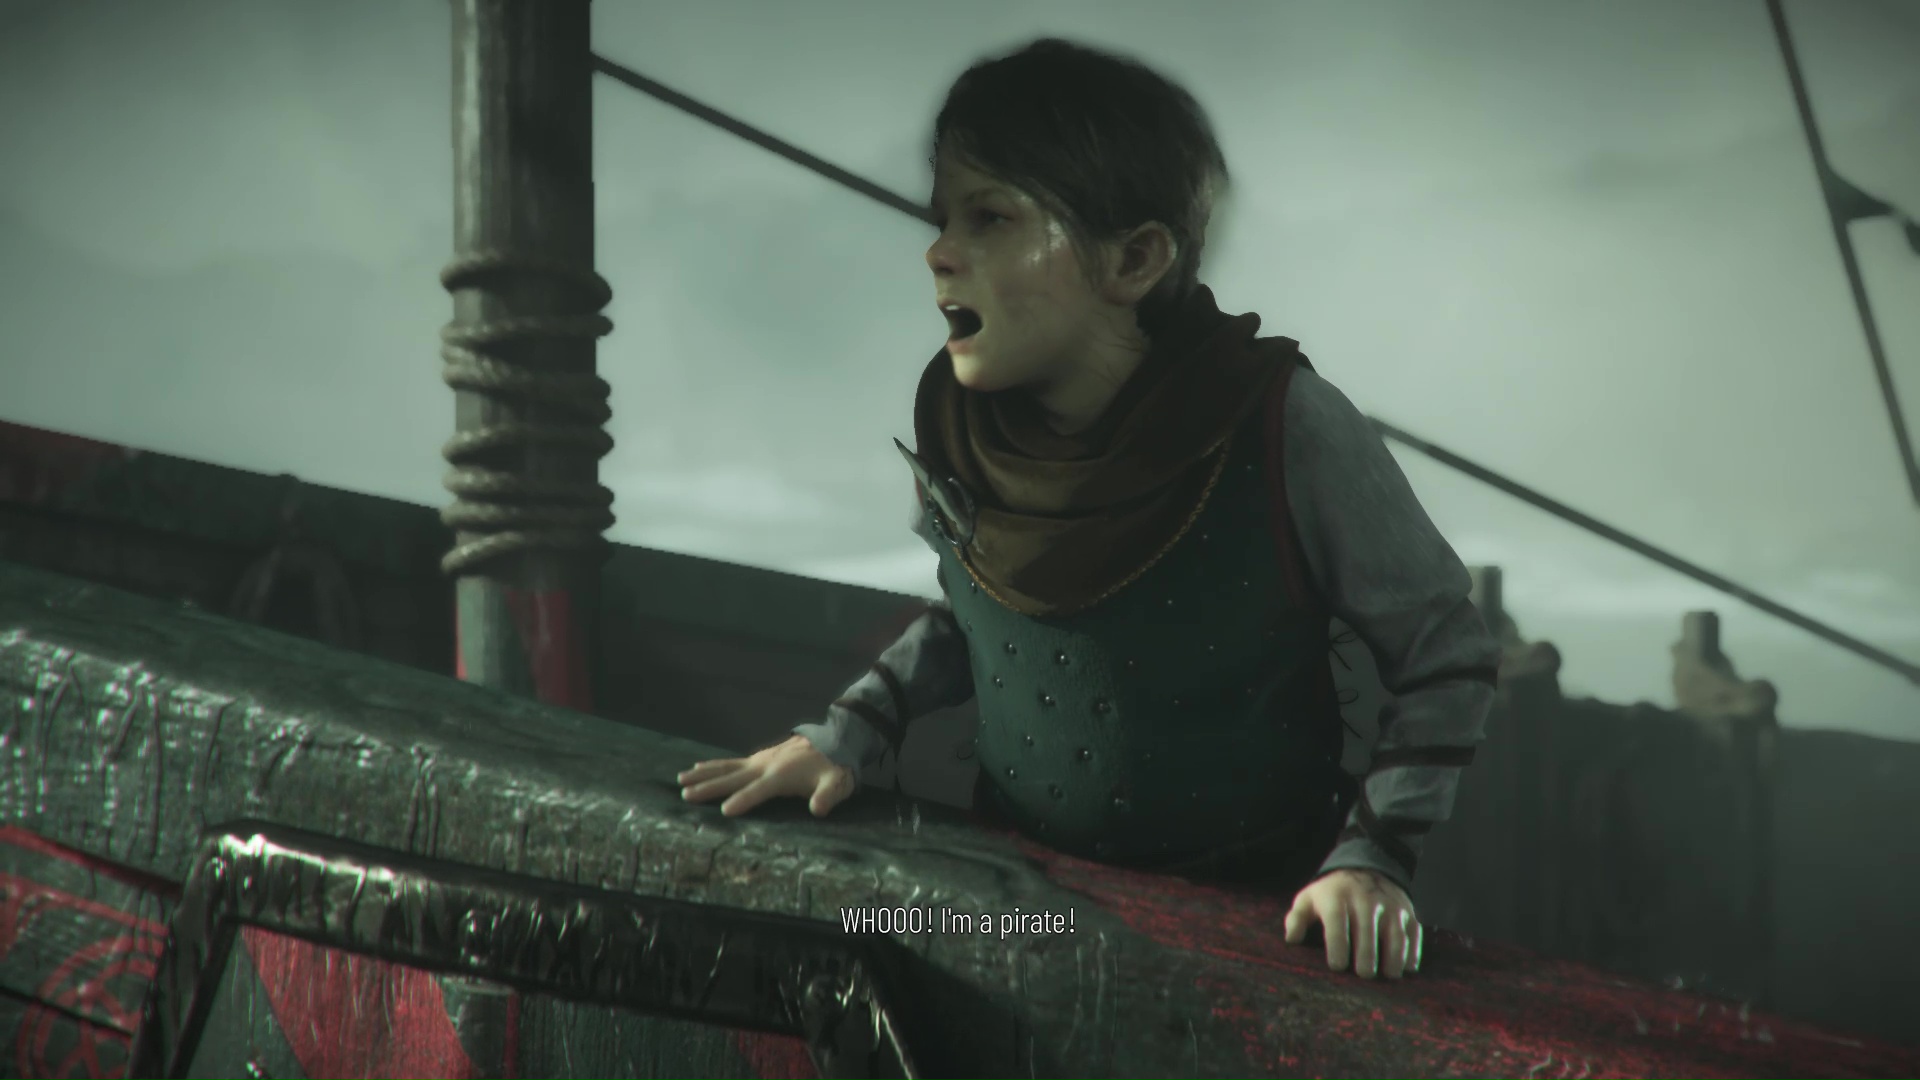 A Plague Tale: Requiem – Where to Find All the Collectibles in Chapter 4 -  Gameranx